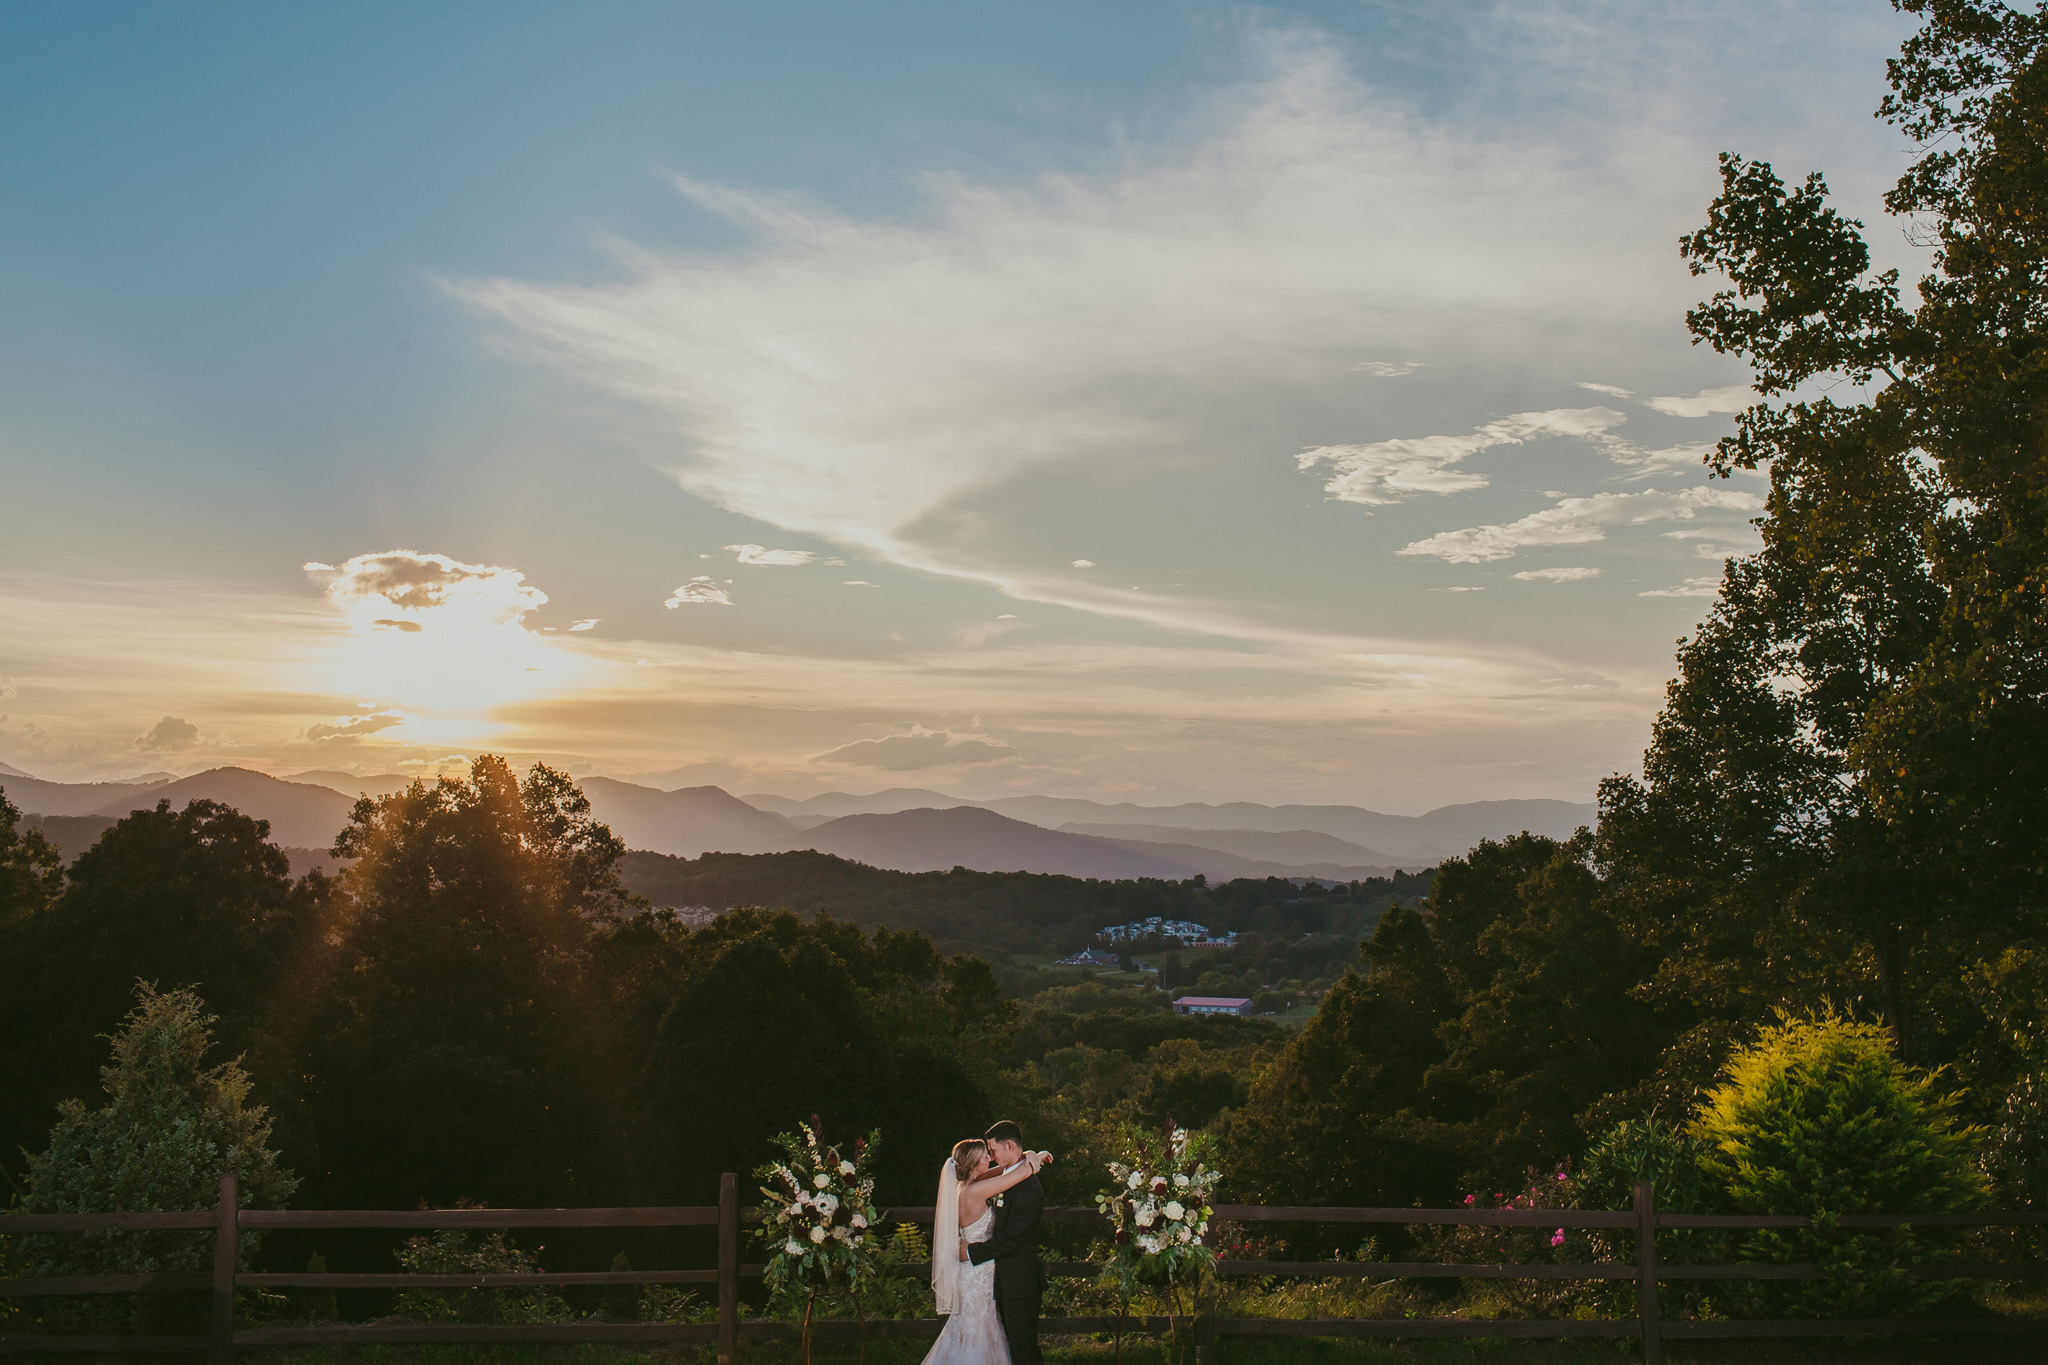 Mountain View Wedding at Crest Center & Pavilion in Asheville